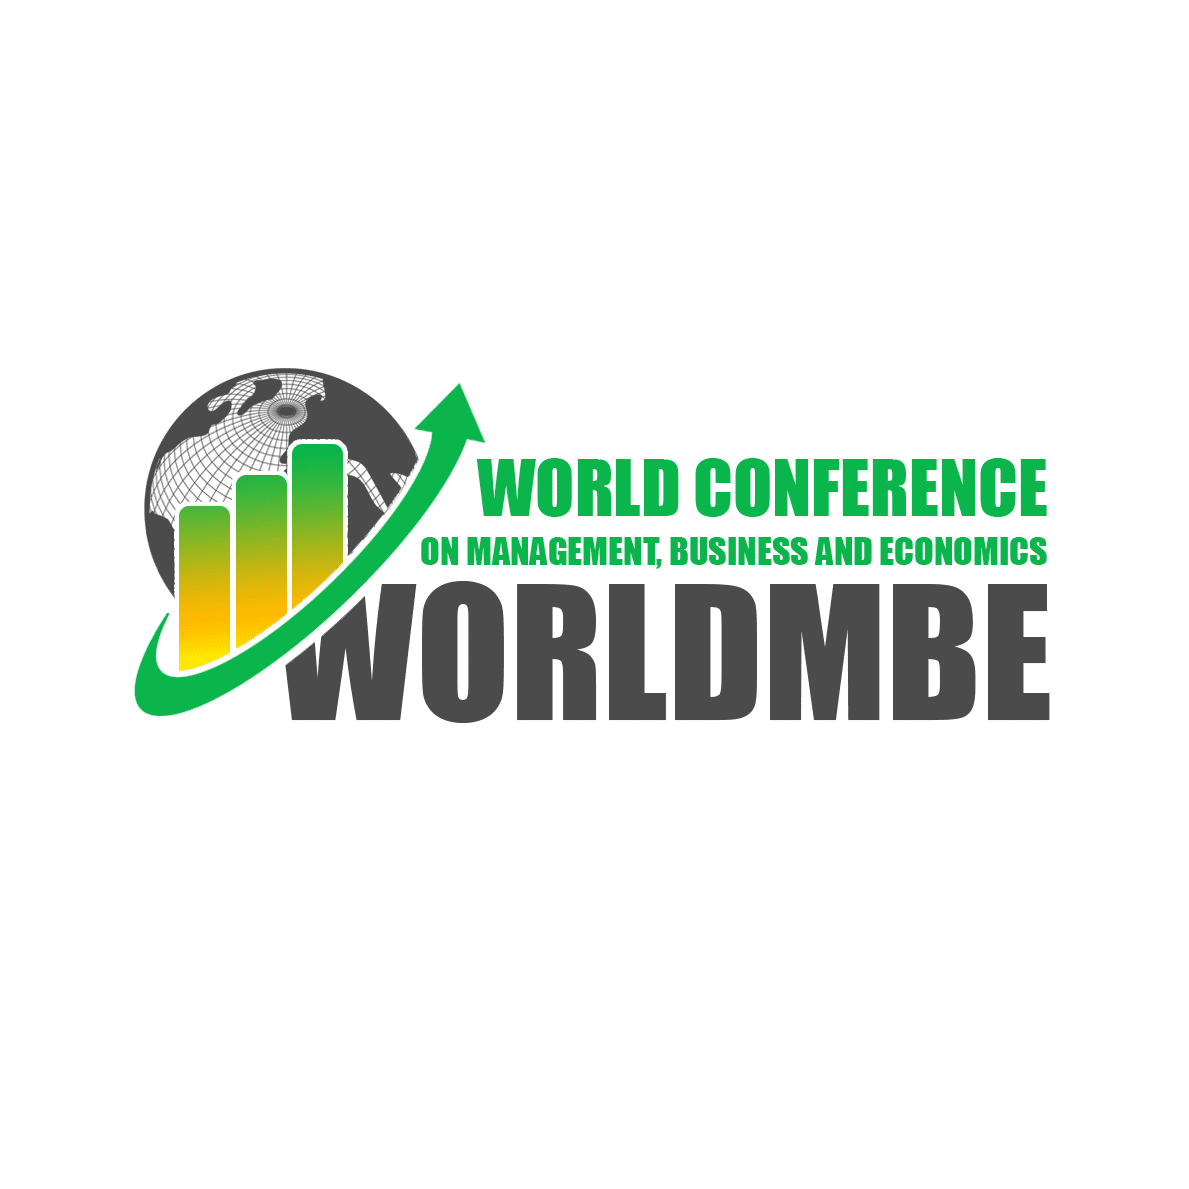 The 5th World Conference on Management, Business and Economics – WORLDMBE